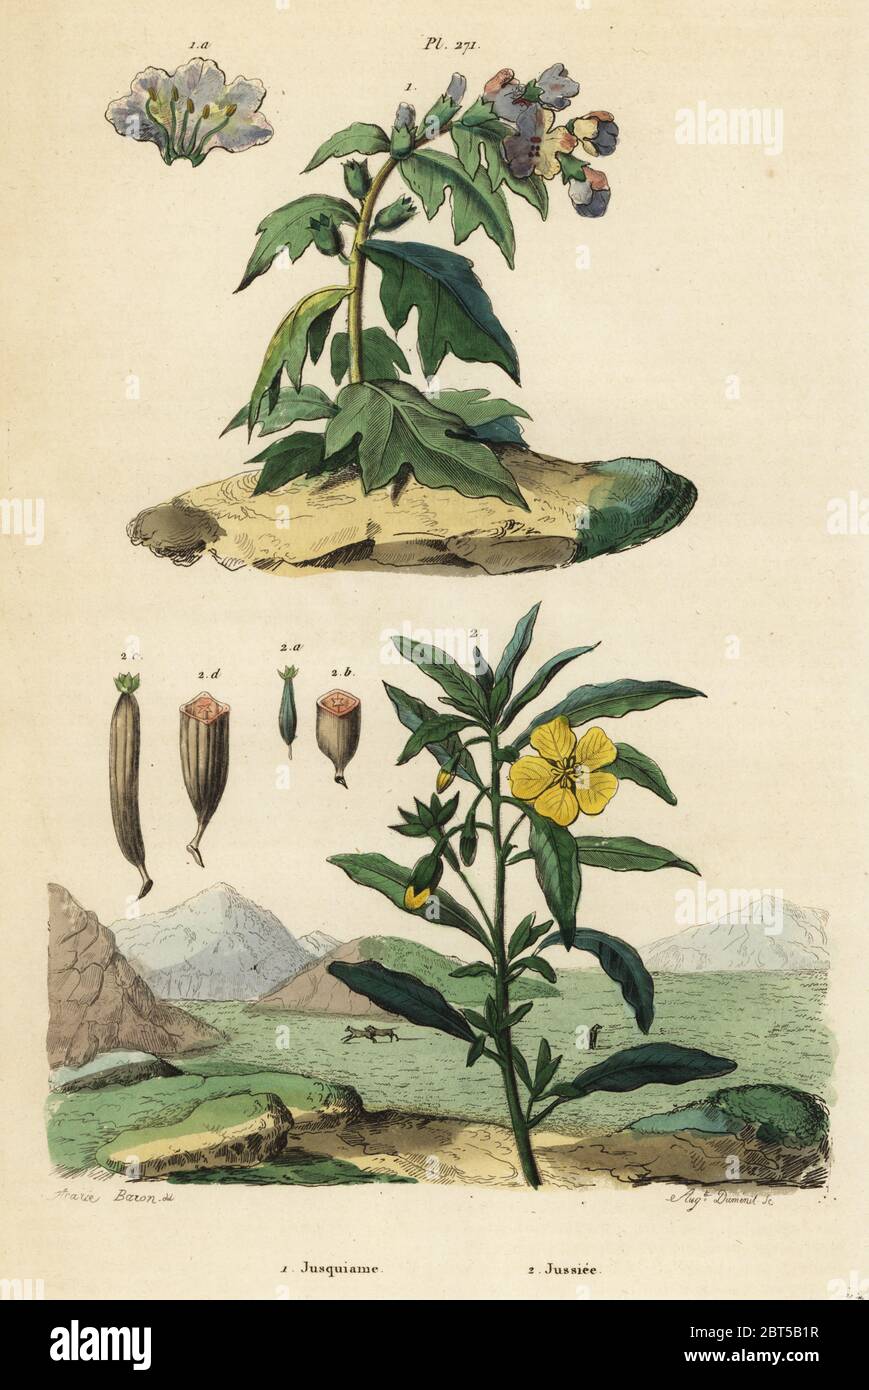 Black henbane, Hyoscyamus niger 1, and Peruvian primrose-willow, Ludwigia peruviana 2. Jusquiame, Jussiee. Handcoloured steel engraving by August Dumenil after an illustration by A. Carie Baron from Felix-Edouard Guerin-Meneville's Dictionnaire Pittoresque d'Histoire Naturelle (Picturesque Dictionary of Natural History), Paris, 1834-39. Stock Photo